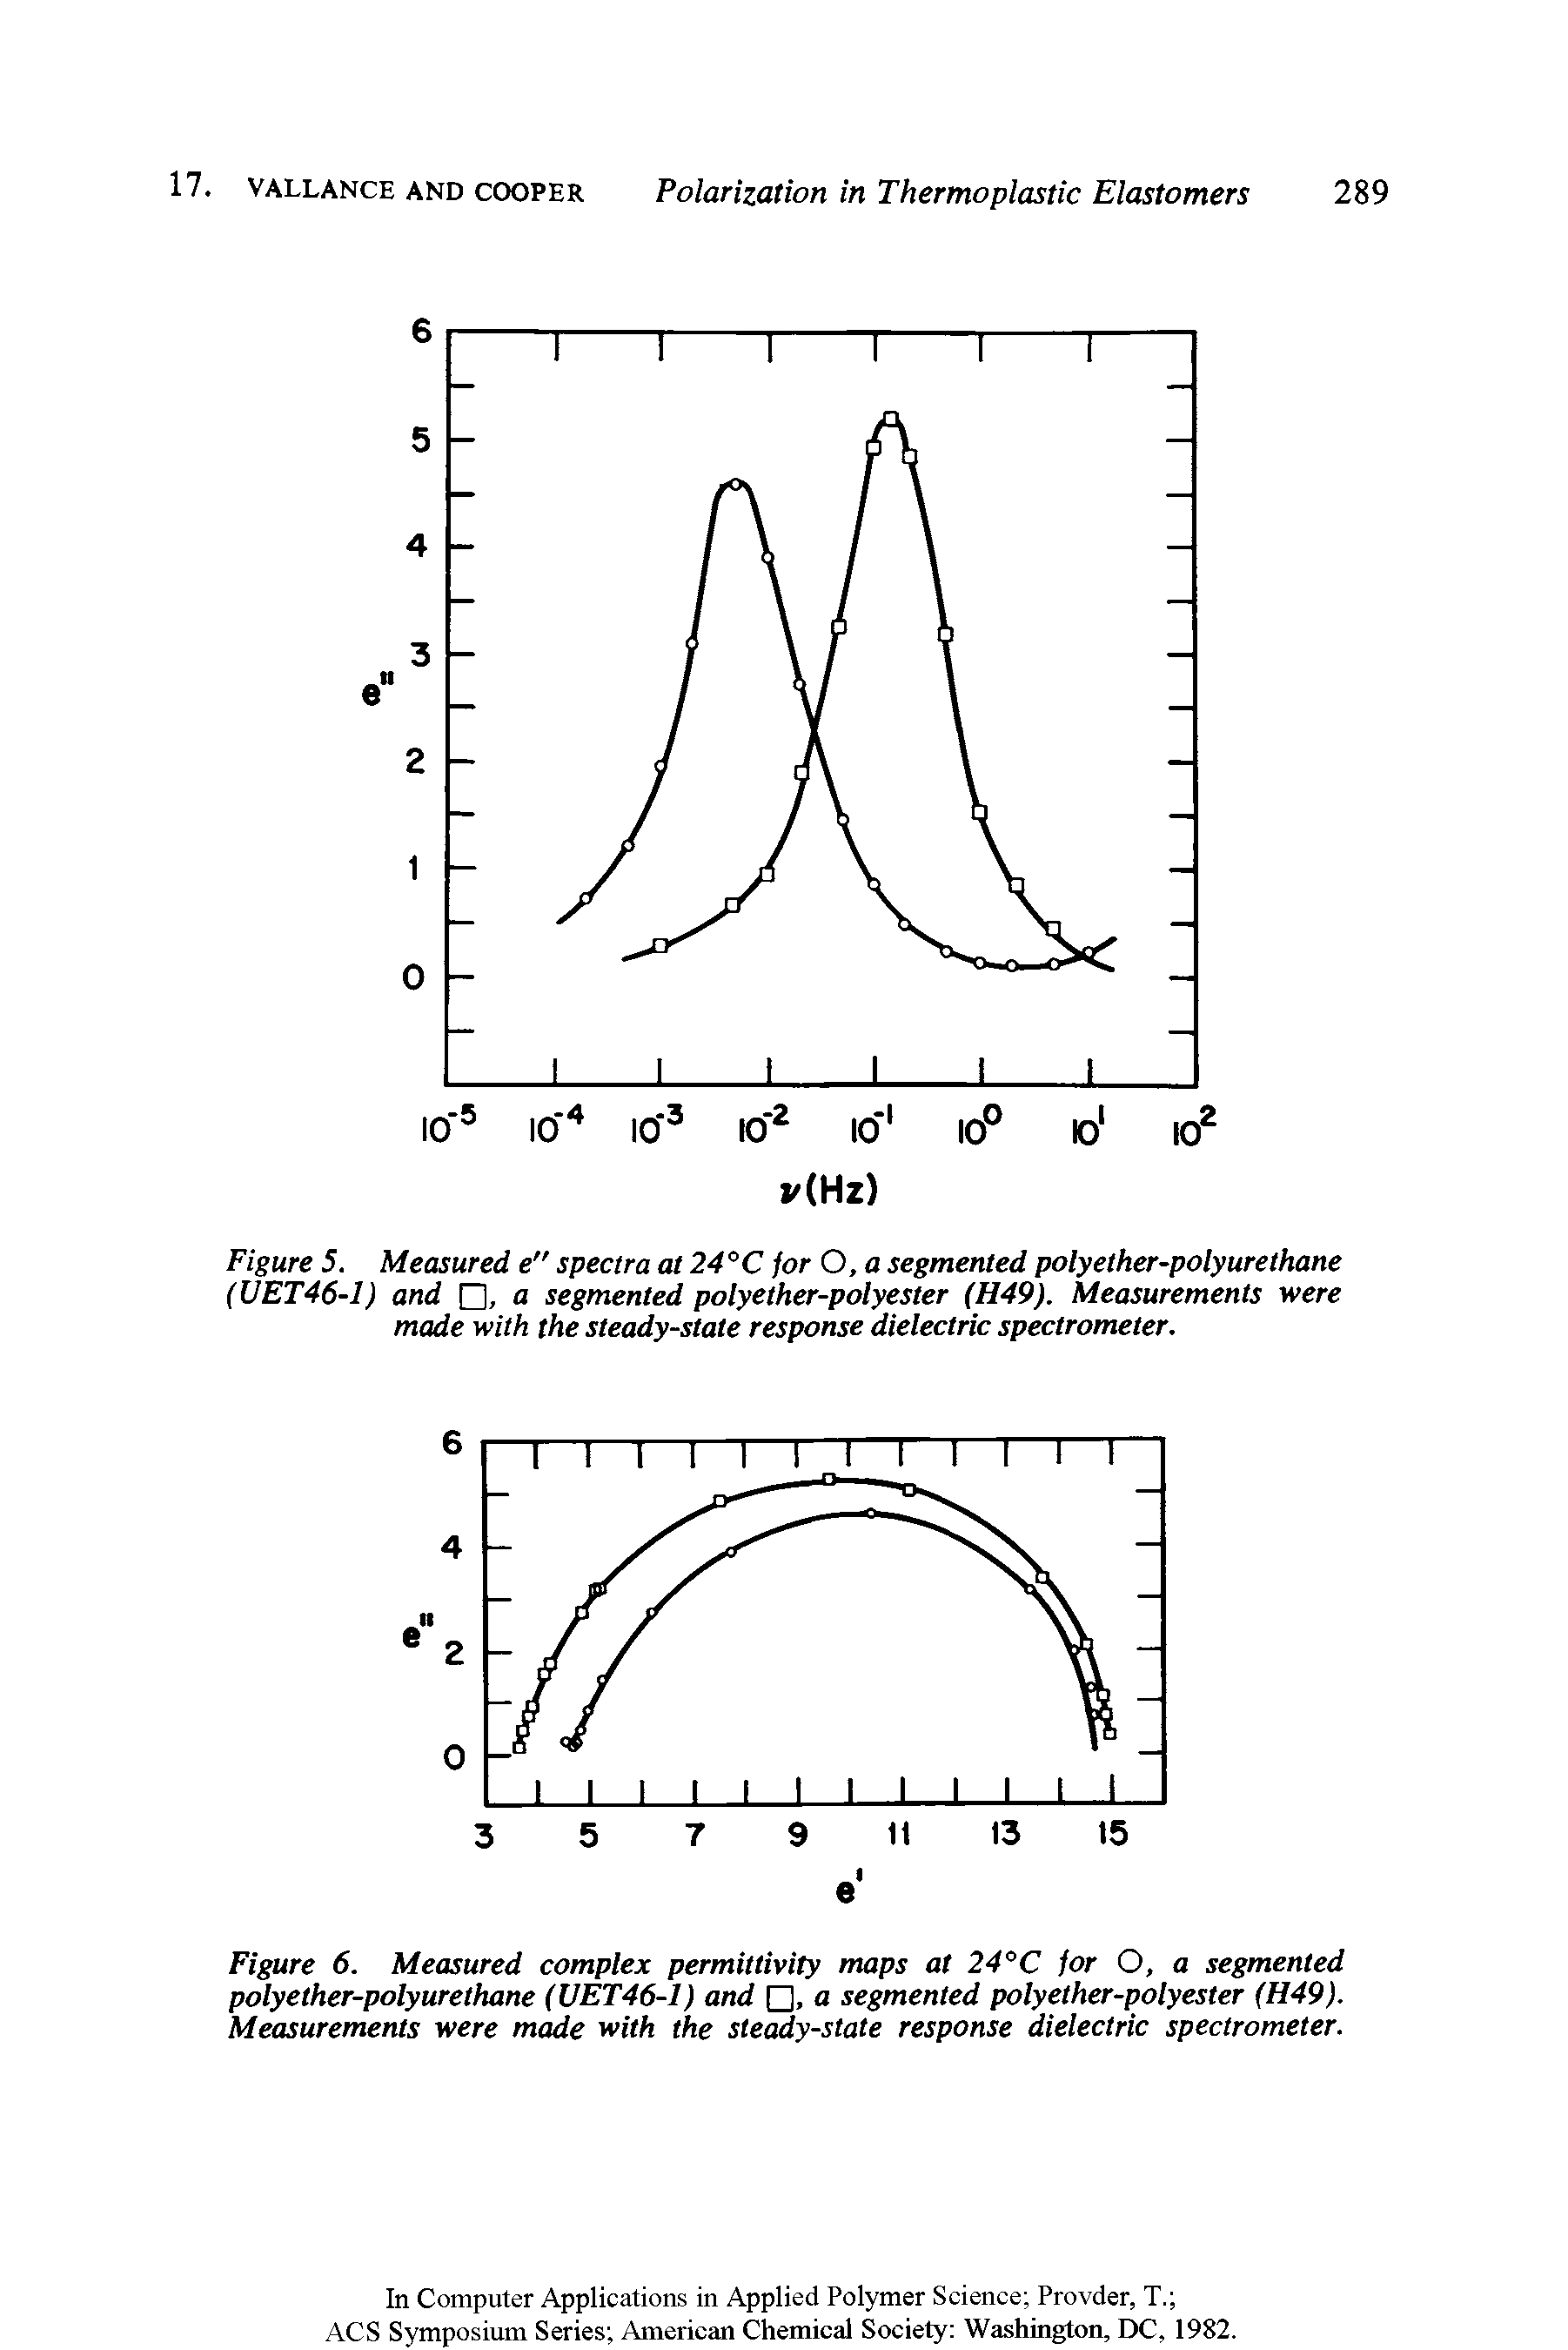 Figure 6. Measured complex permittivity maps at 24°C for O, a segmented polyether-polyurethane (UET46-1) and , a segmented polyether-polyester (H49). Measurements were made with the steady-state response dielectric spectrometer.